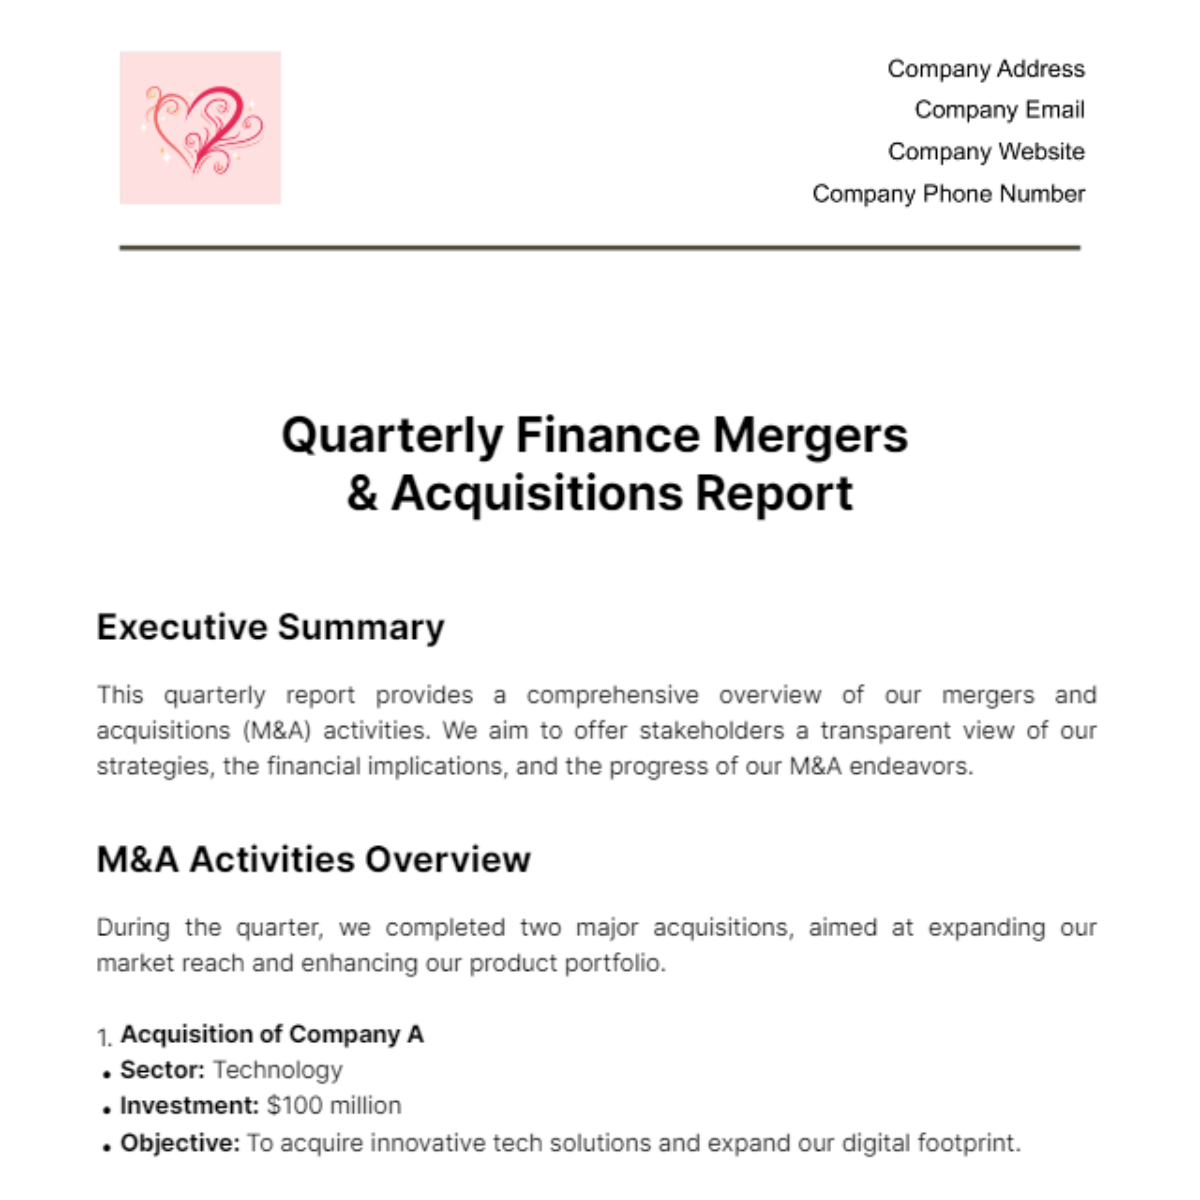 Quarterly Finance Mergers & Acquisitions Report Template